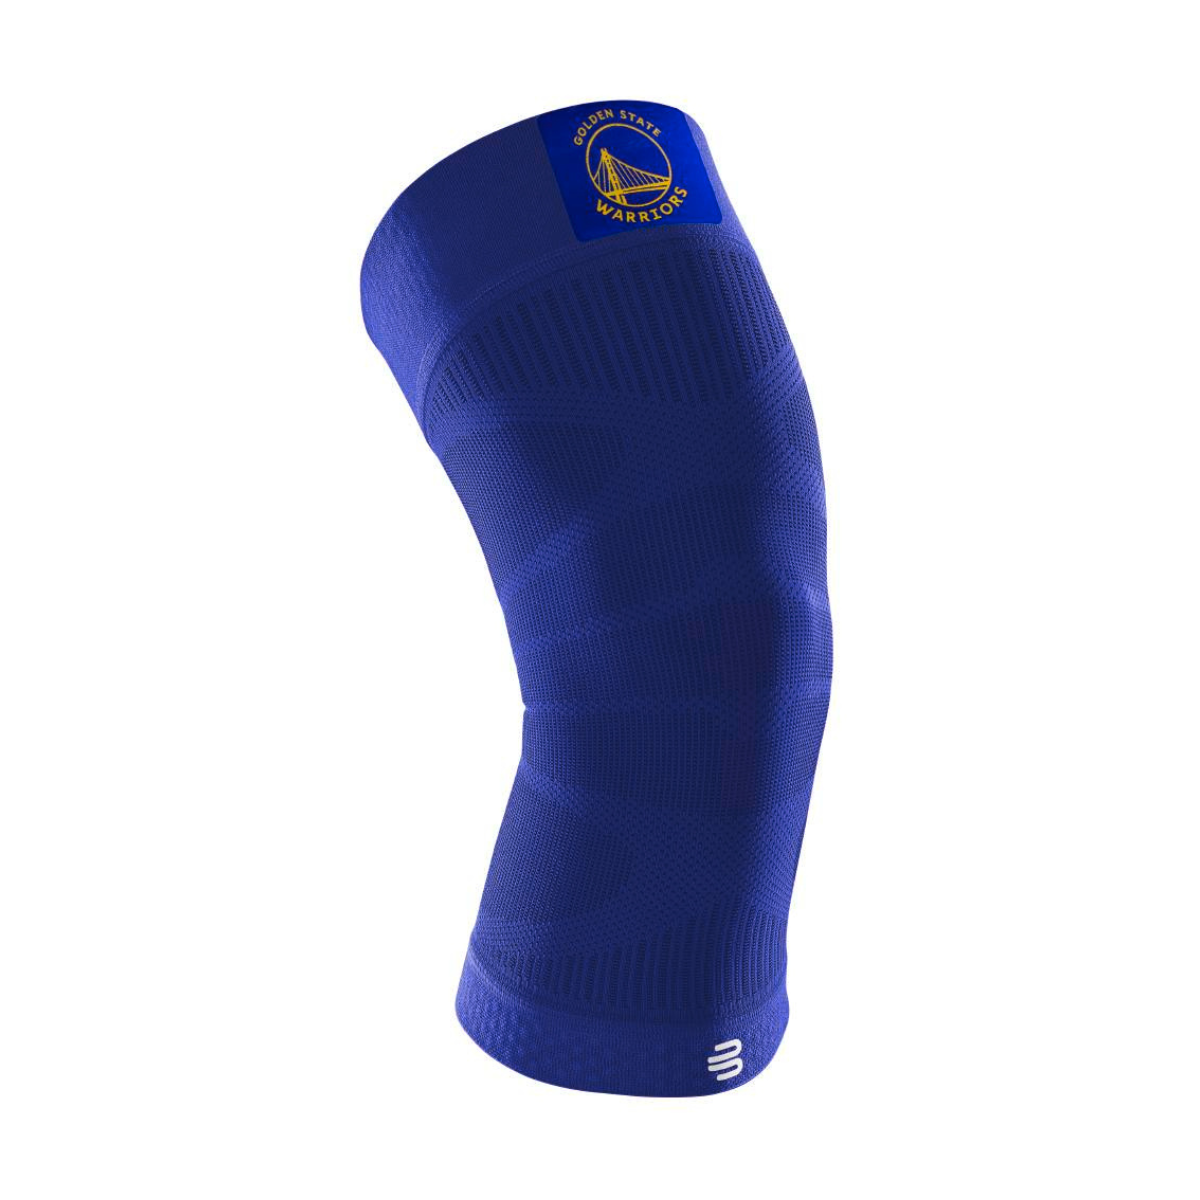 Golden State Warriors | NBA Team Editions | Sports compression for the knee 1 PIECE.